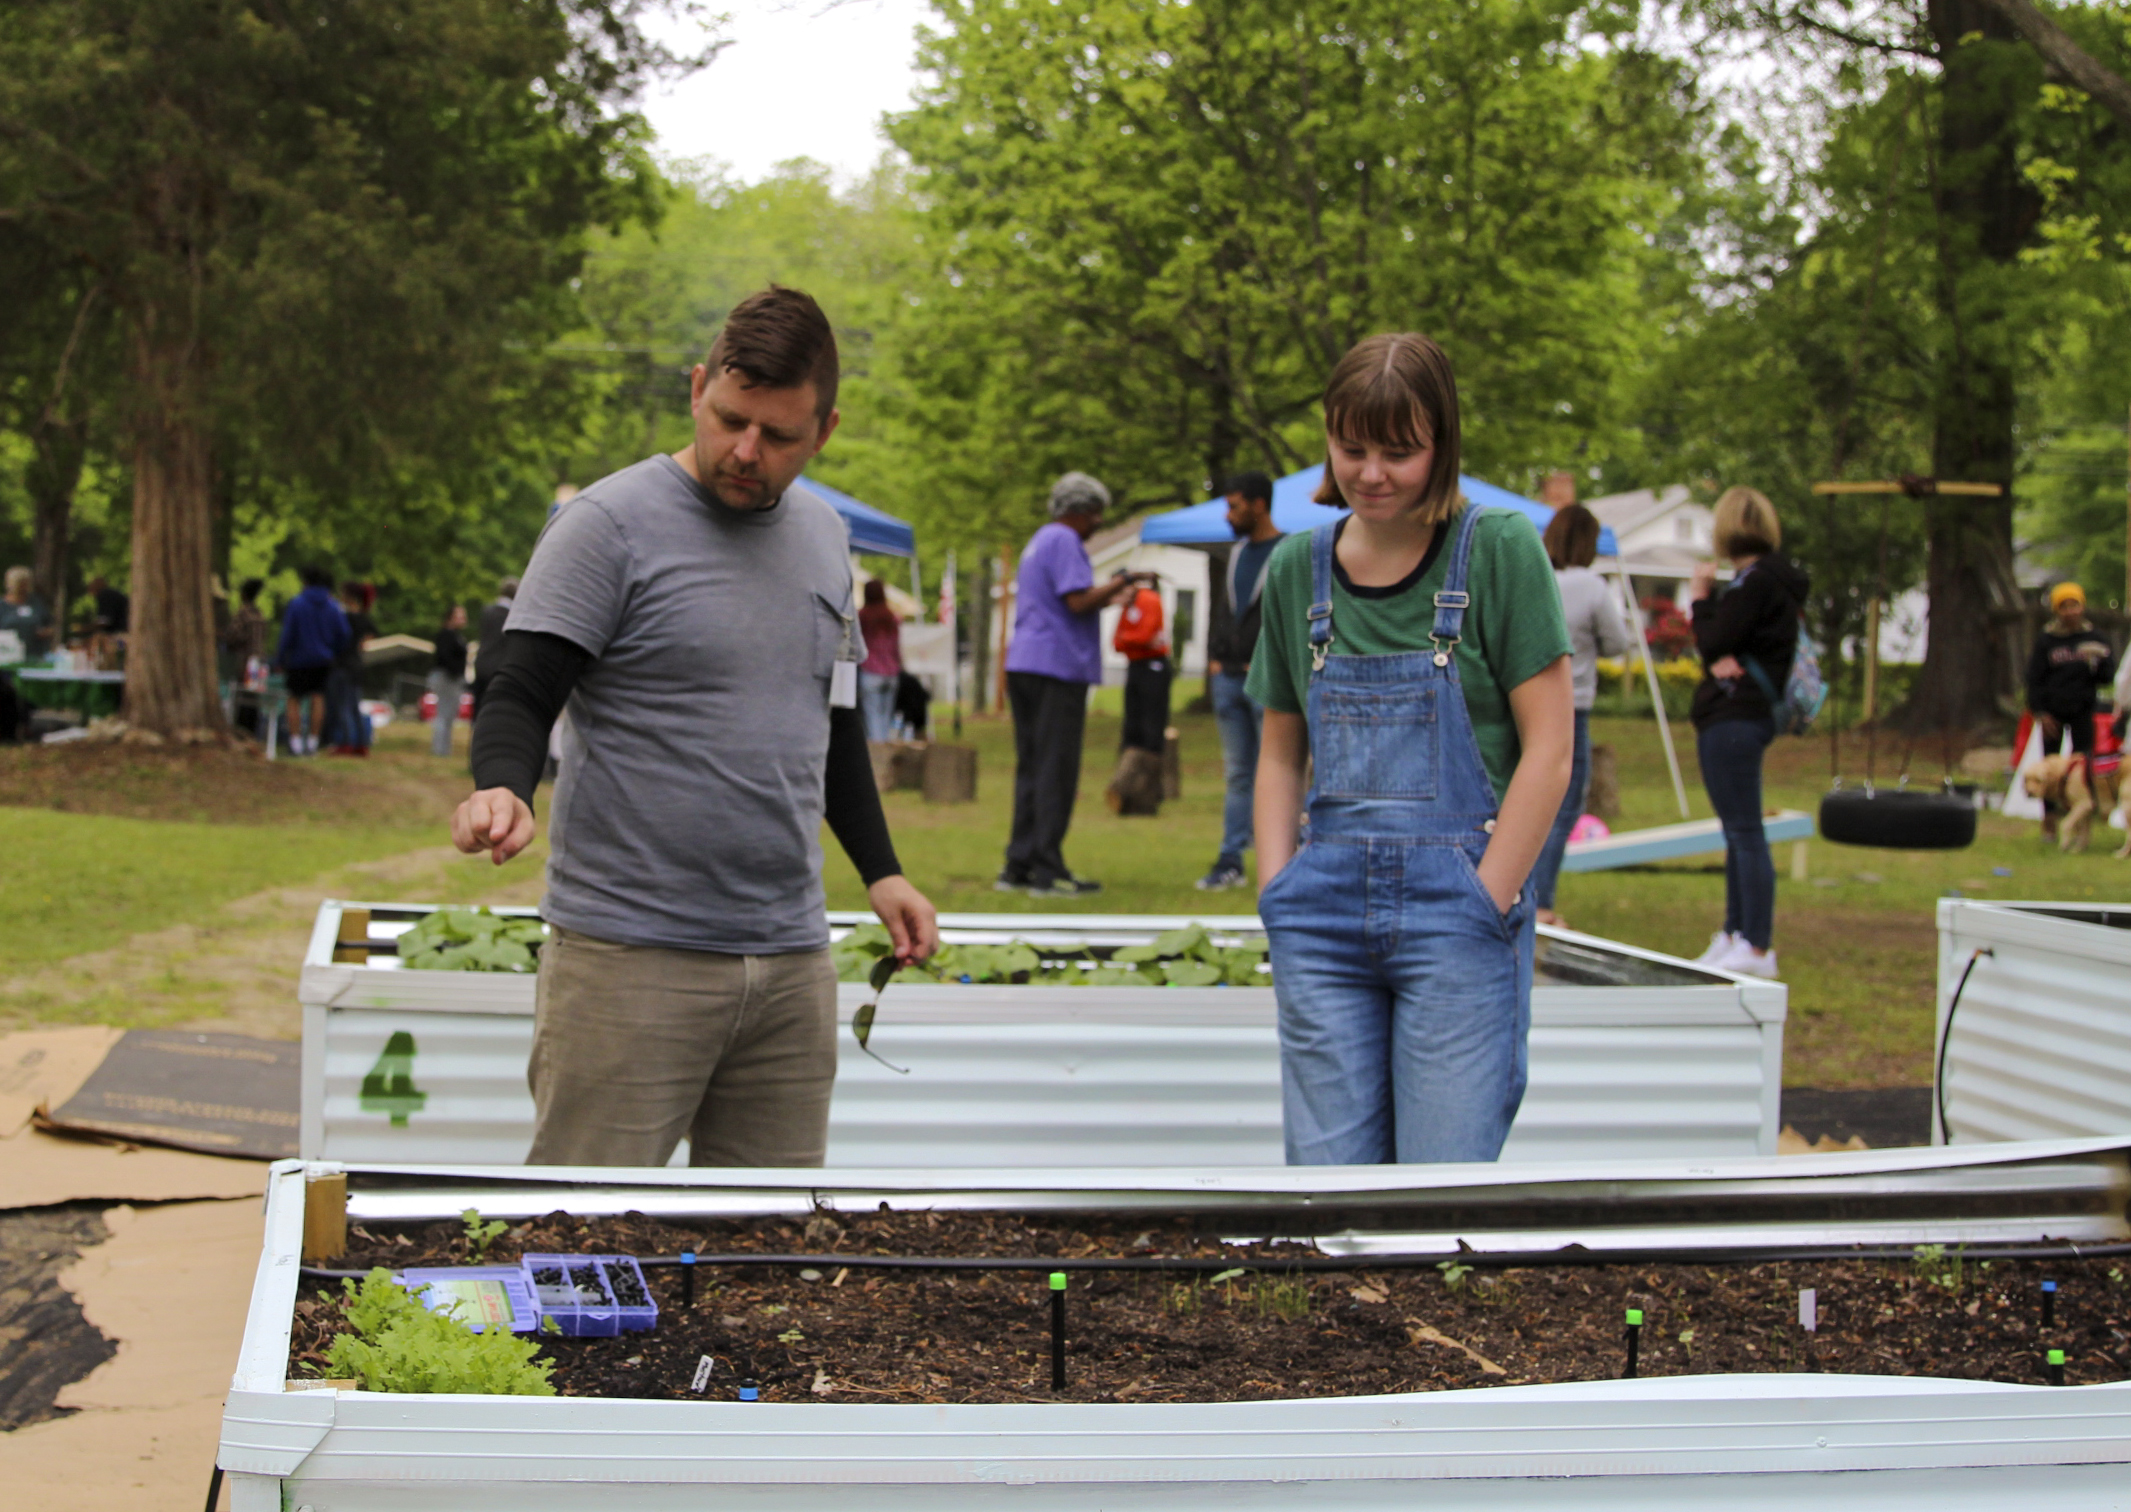 Man and woman standing next to raised beds with seedlings germinating.